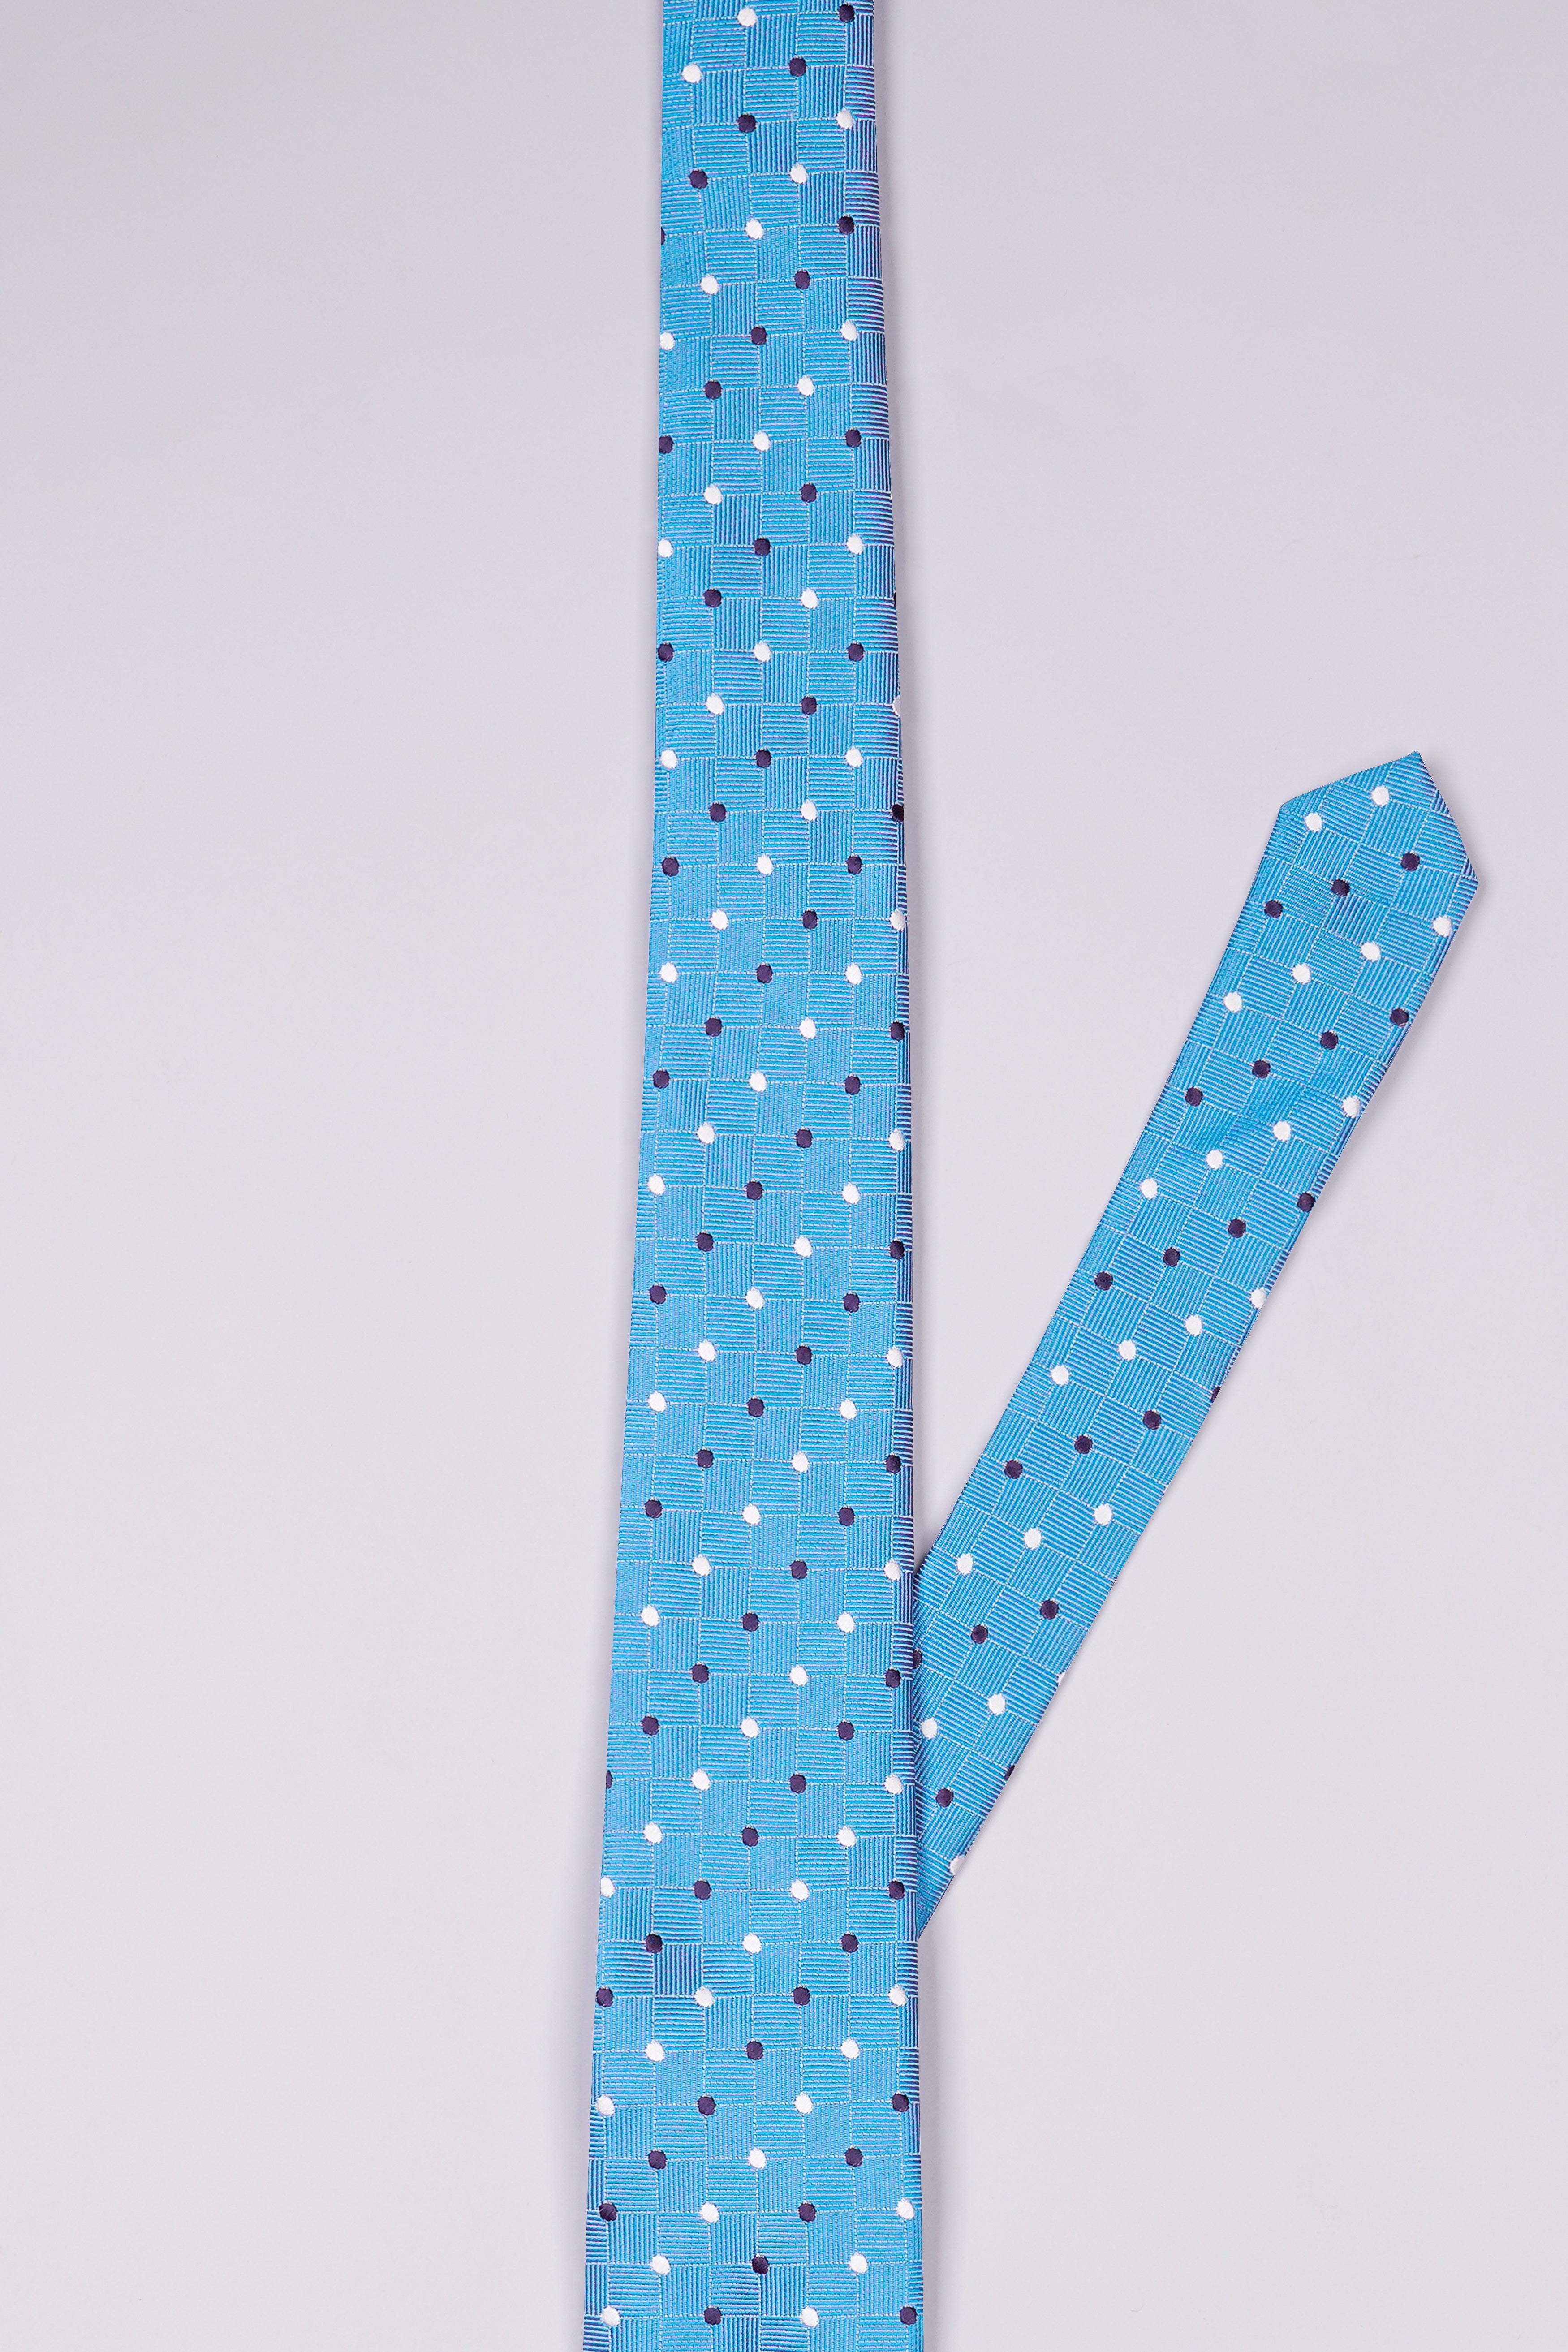 Shakespeare Light Blue Textutred Jacquard Tie with Pocket Square TP064